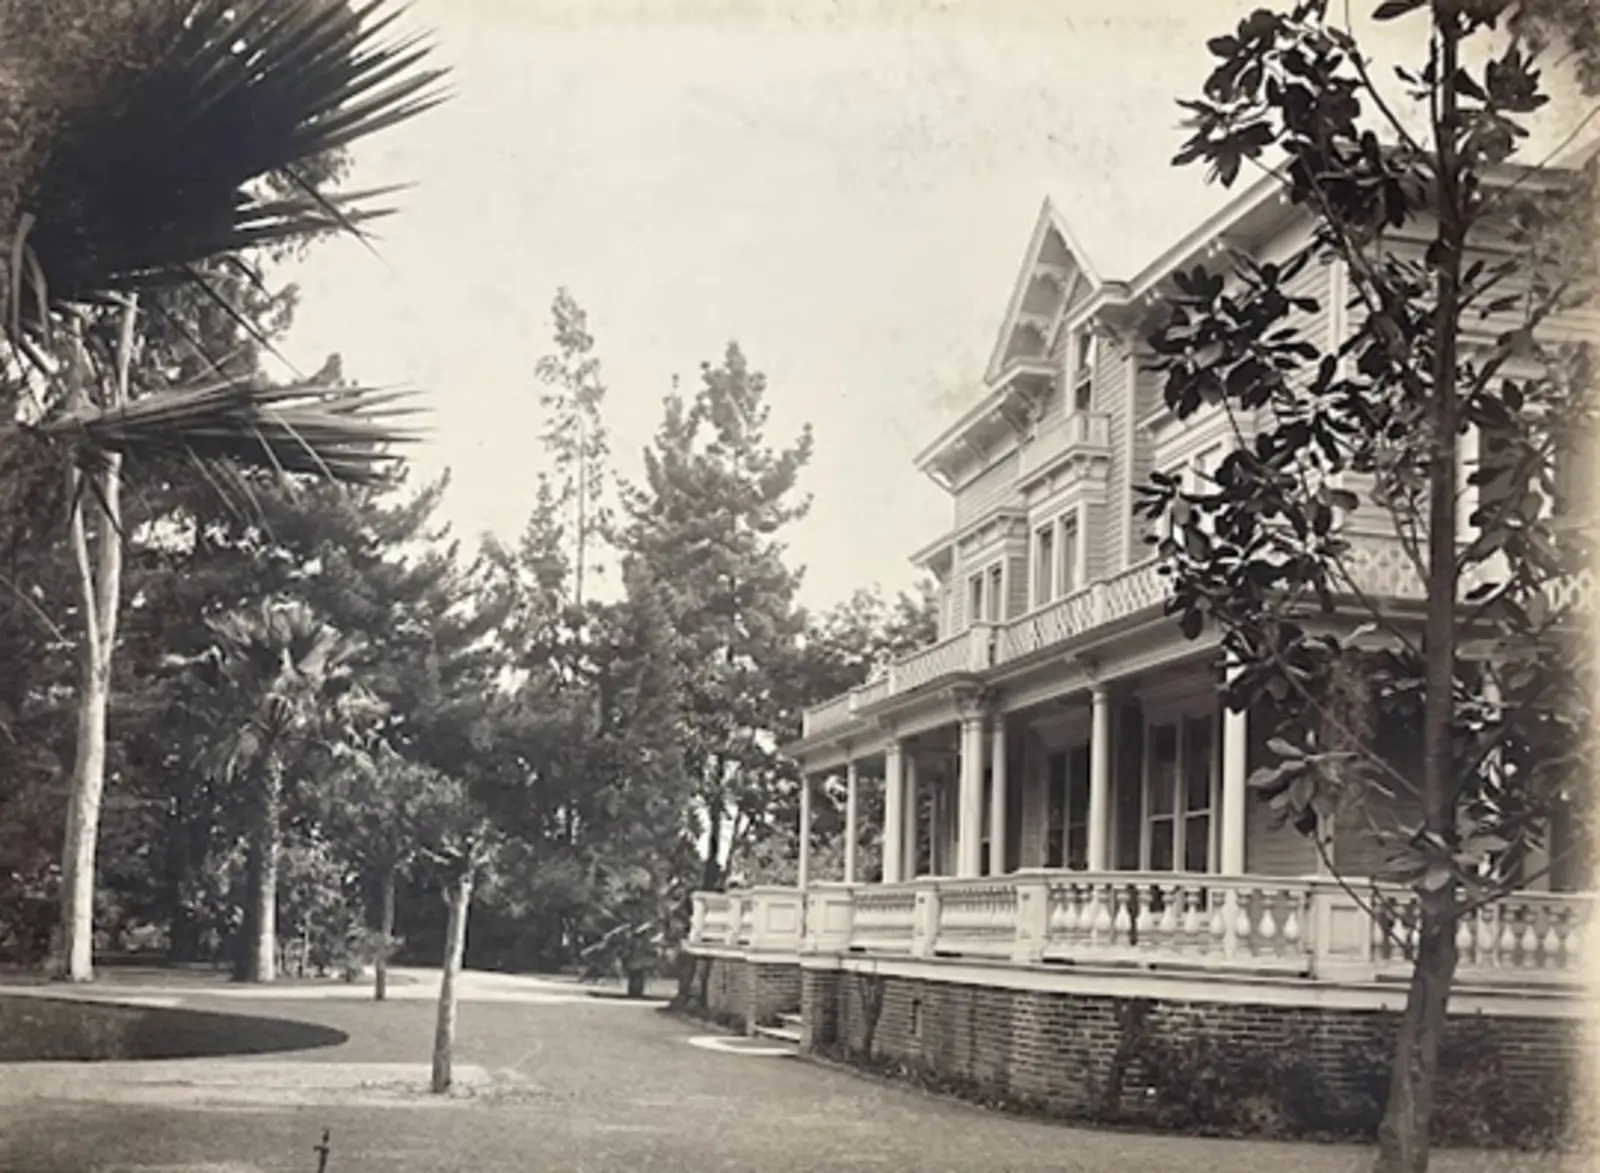 Black and white photograph of a large house with a wrapping porch. The house is surrounded by green grass and tall trees.